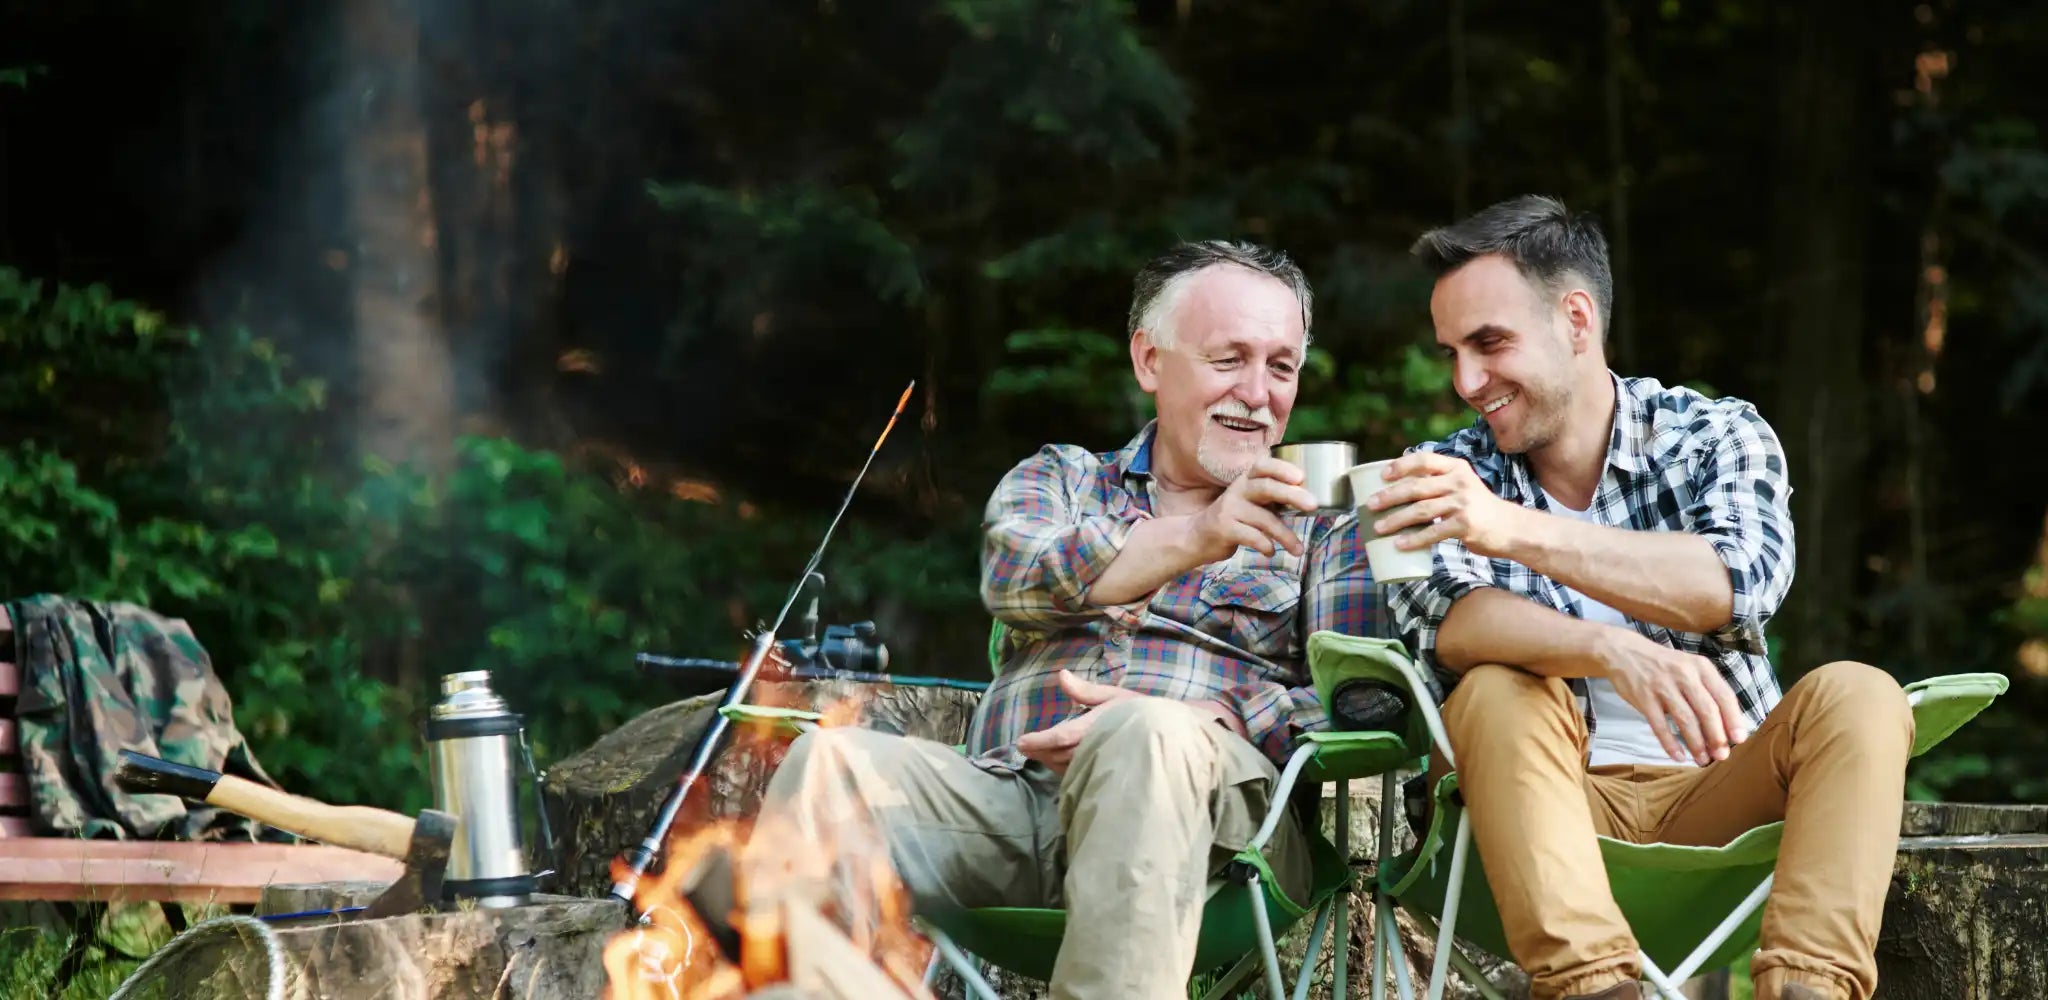 father and son toasting hot beverages in front of a campfire